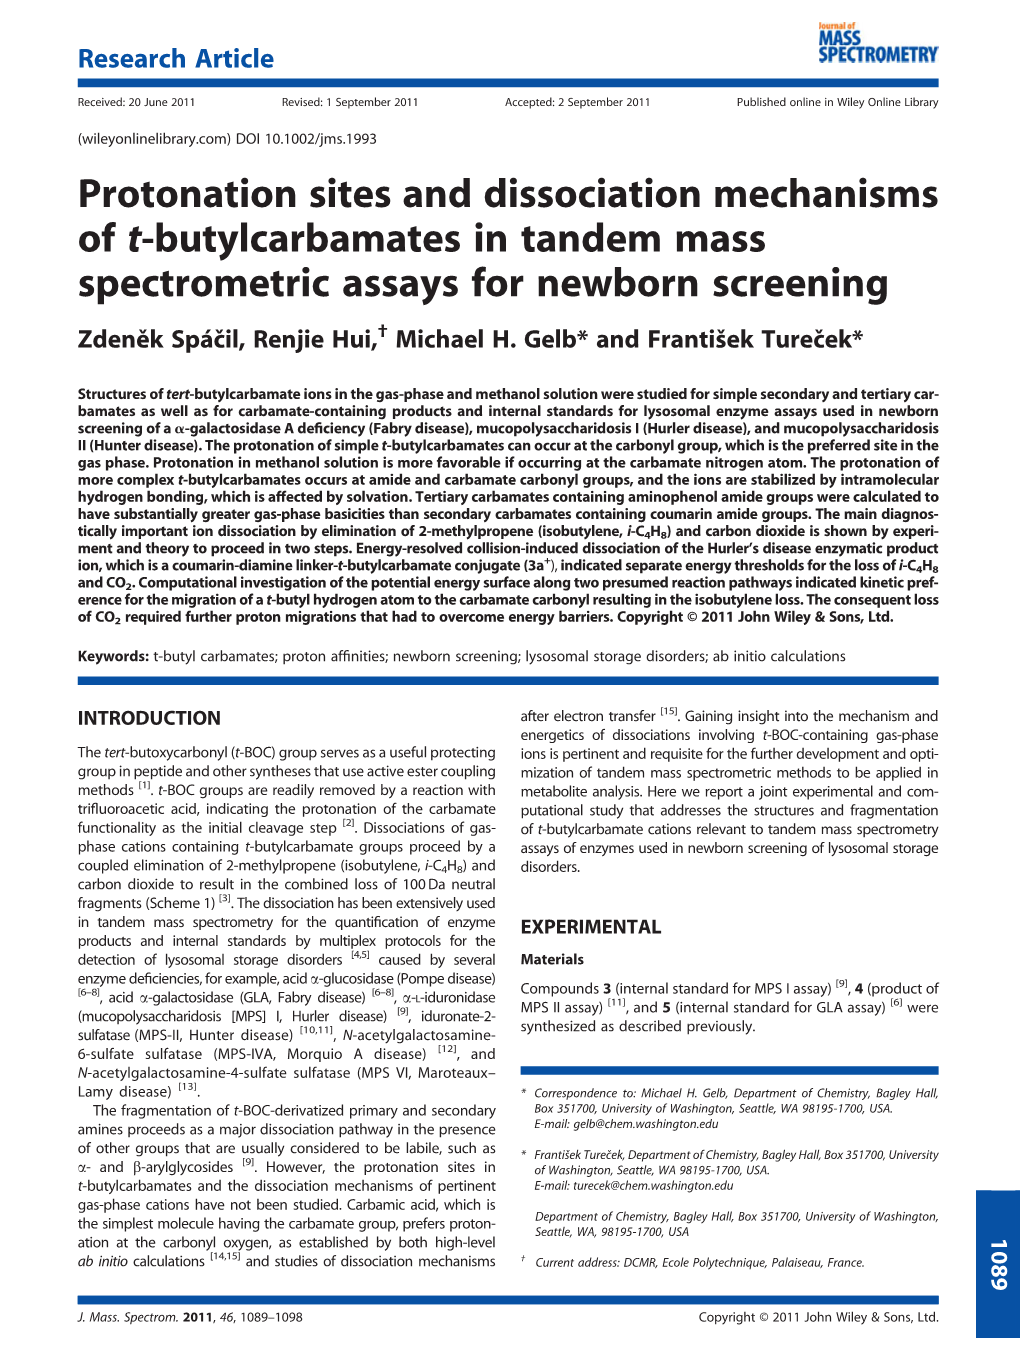 Protonation Sites and Dissociation Mechanisms of Tbutylcarbamates In